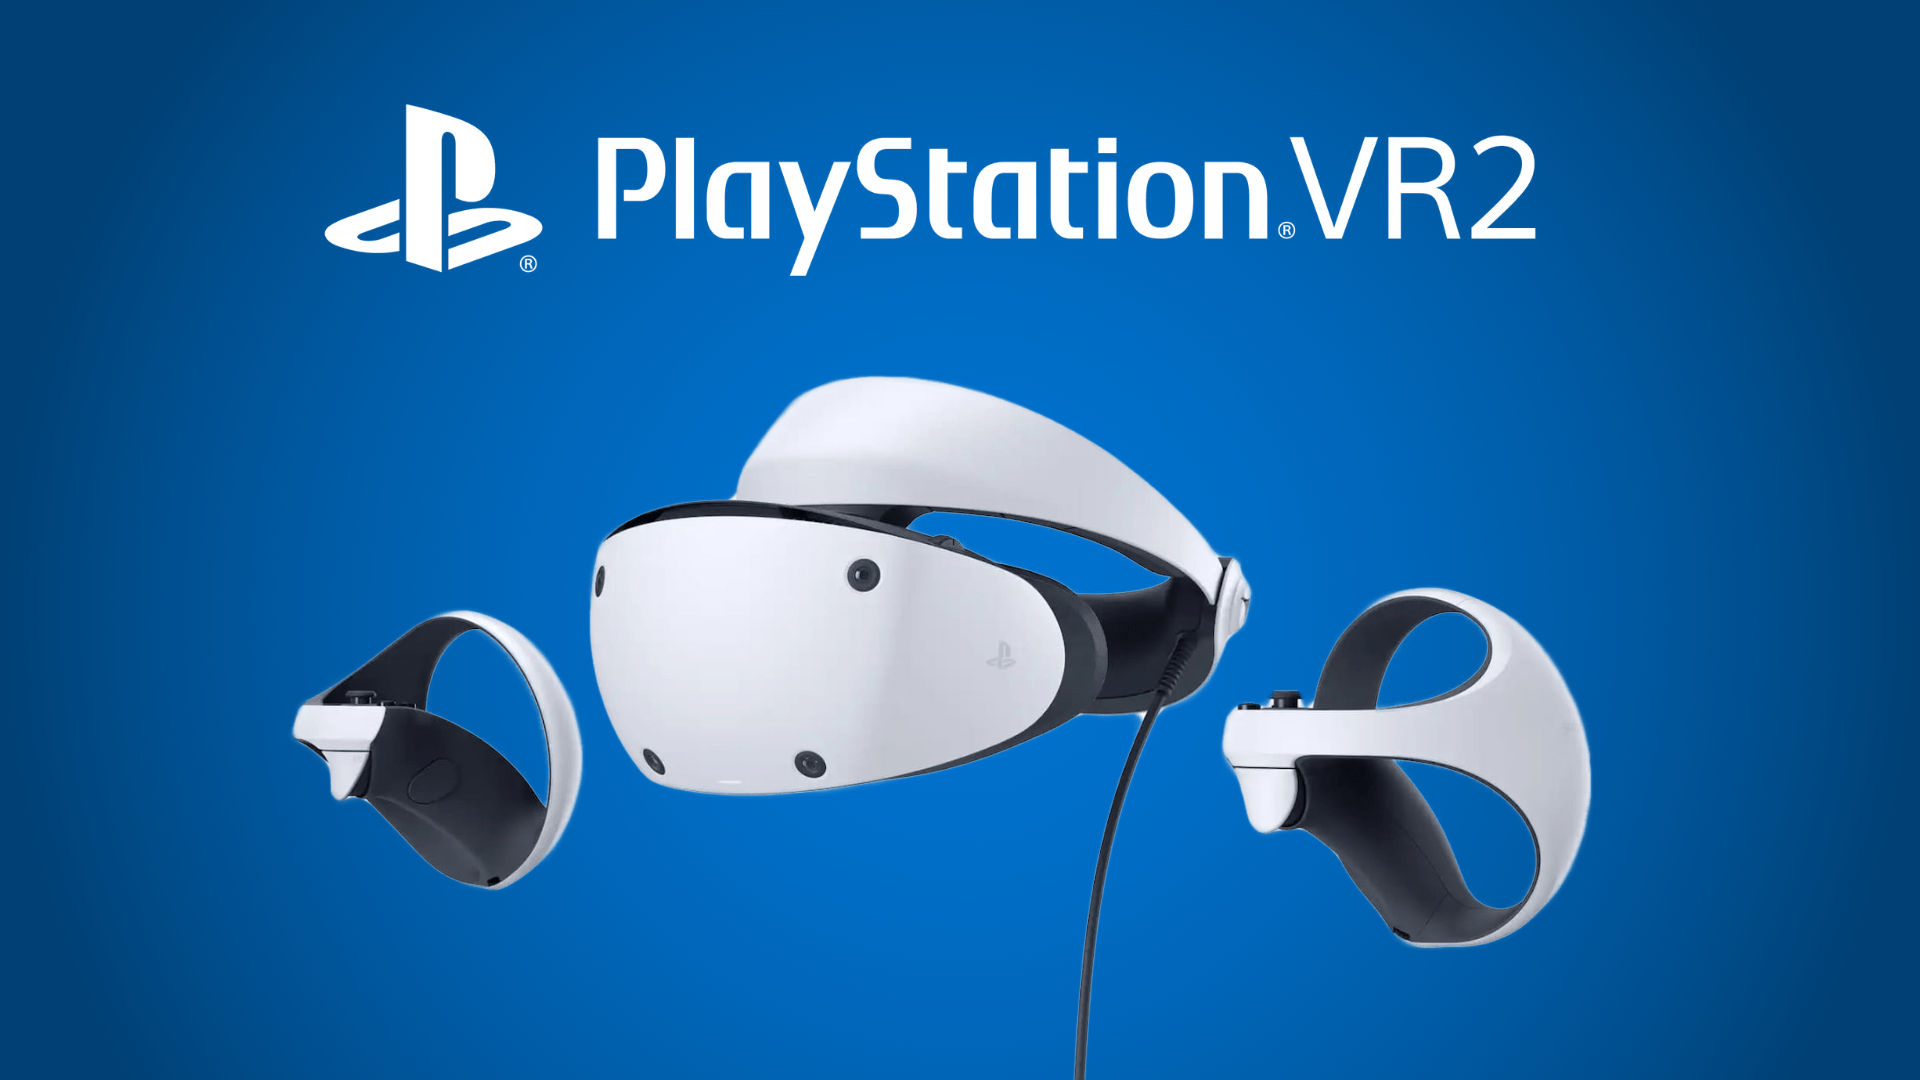 rådgive Sump Pick up blade Playstation VR 2: Release, resolution, controller - all you need to know